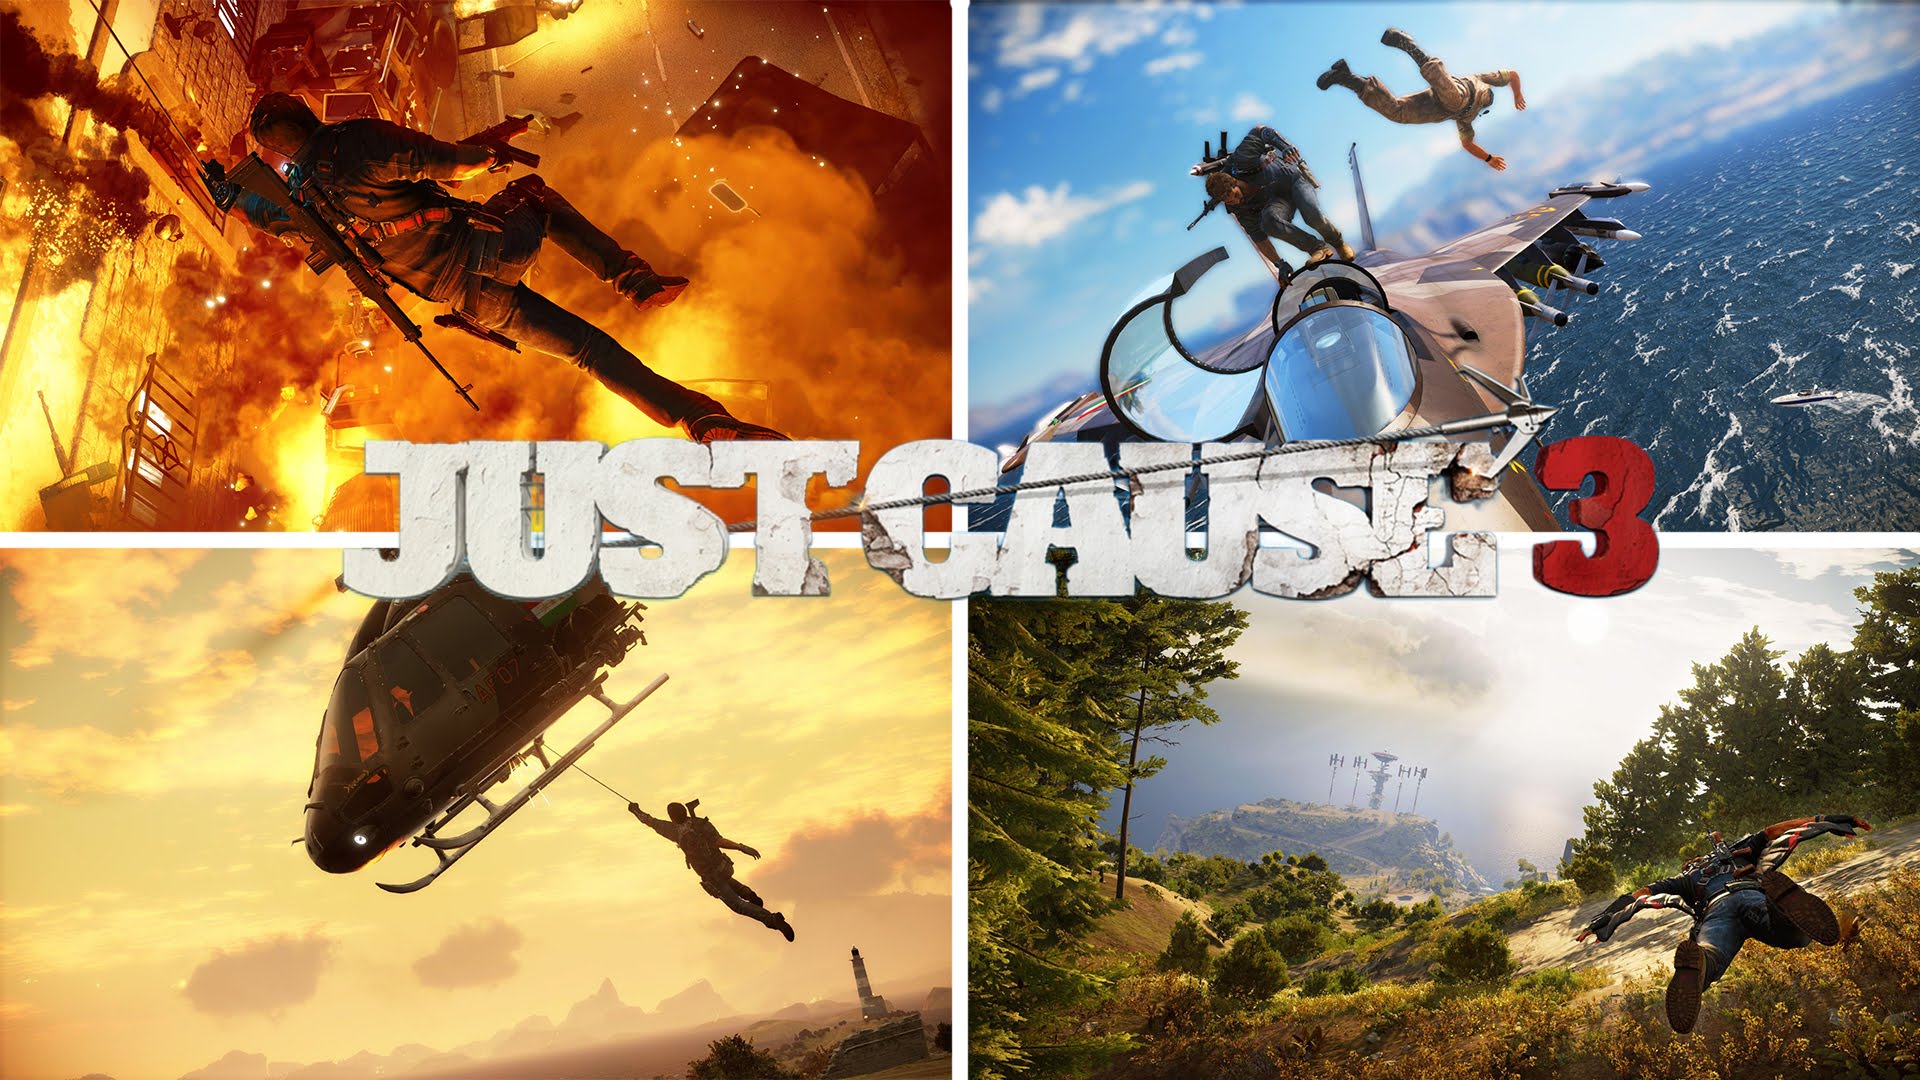 Just Cause 3 Wallpapers Pictures Images HD Wallpapers Download Free Images Wallpaper [wallpaper981.blogspot.com]